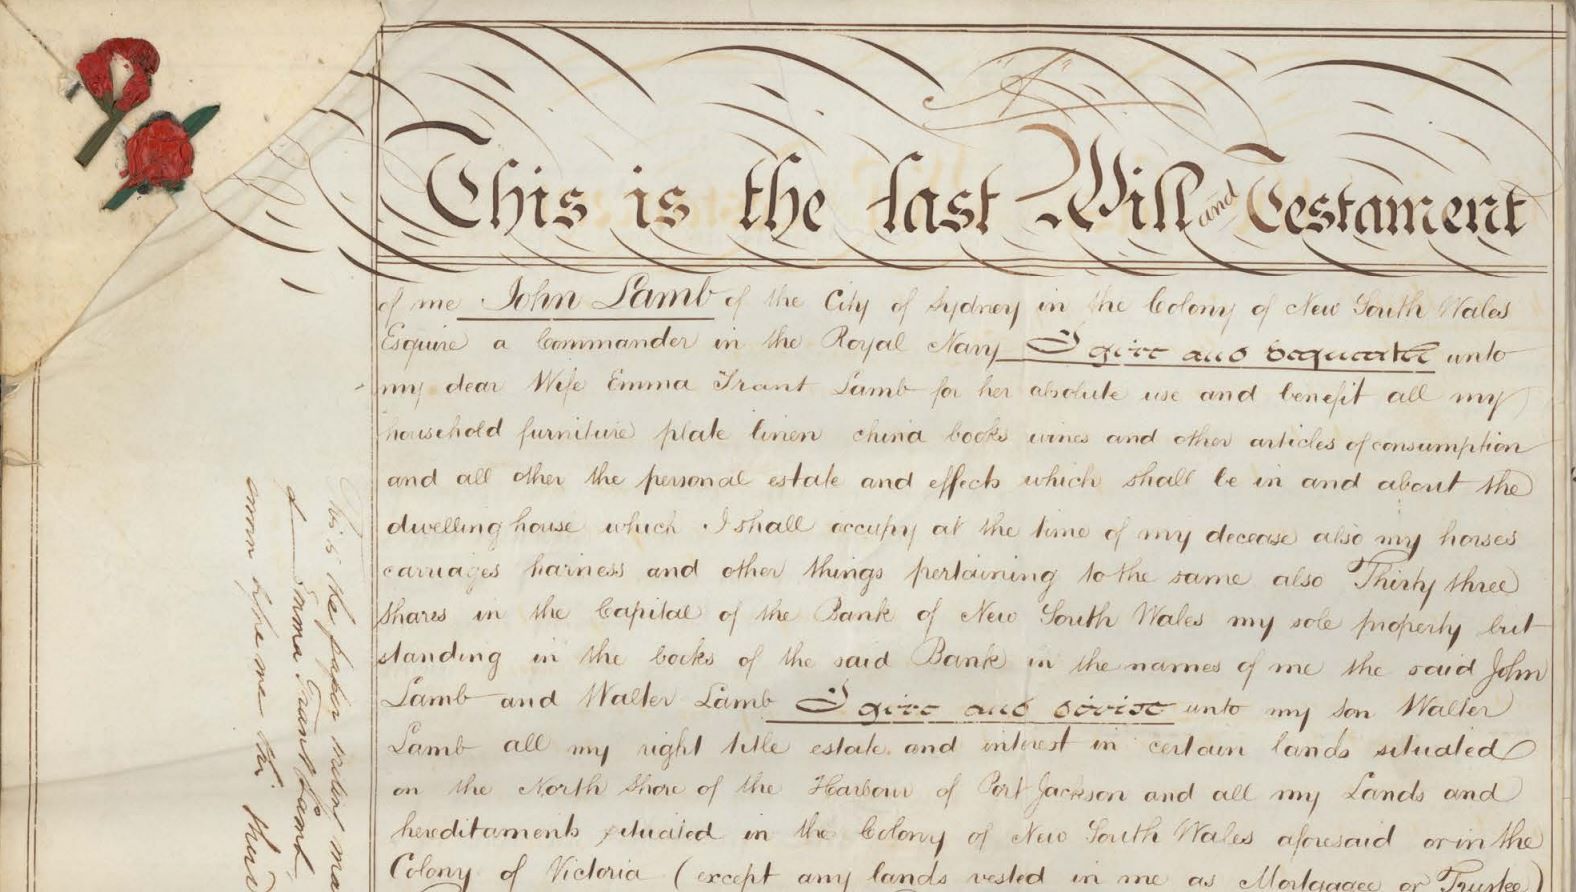 A last will and testament from 1863